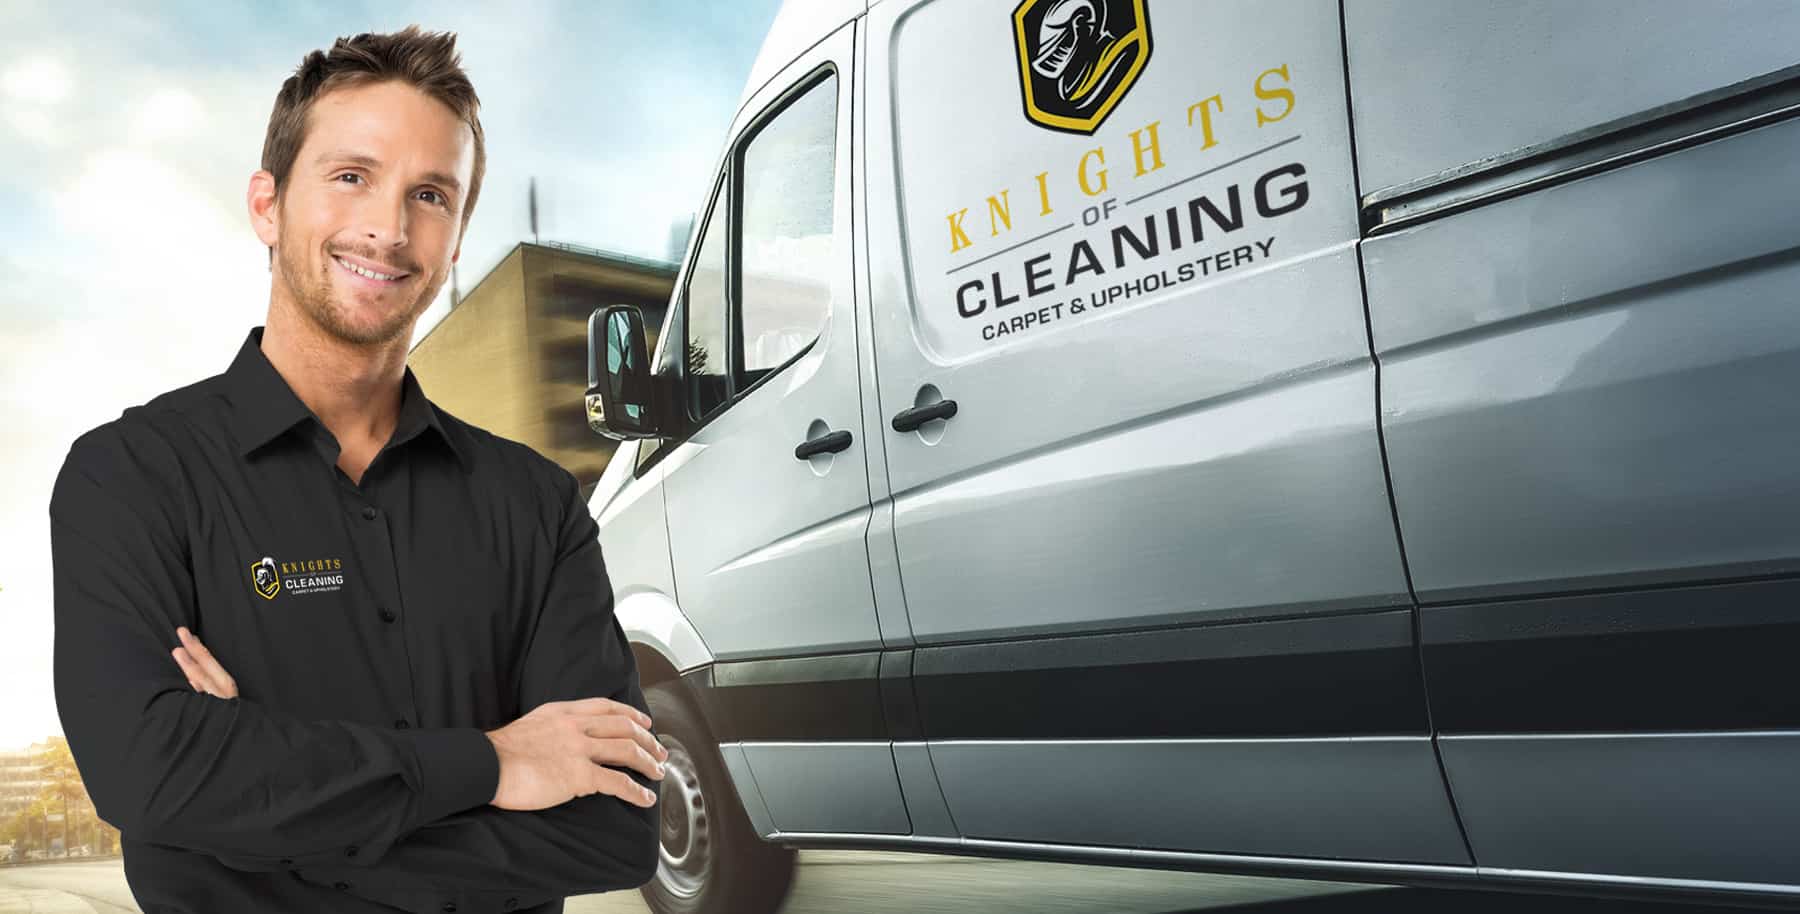 Residential Cleaning Company in Langley | Knights of Cleaning